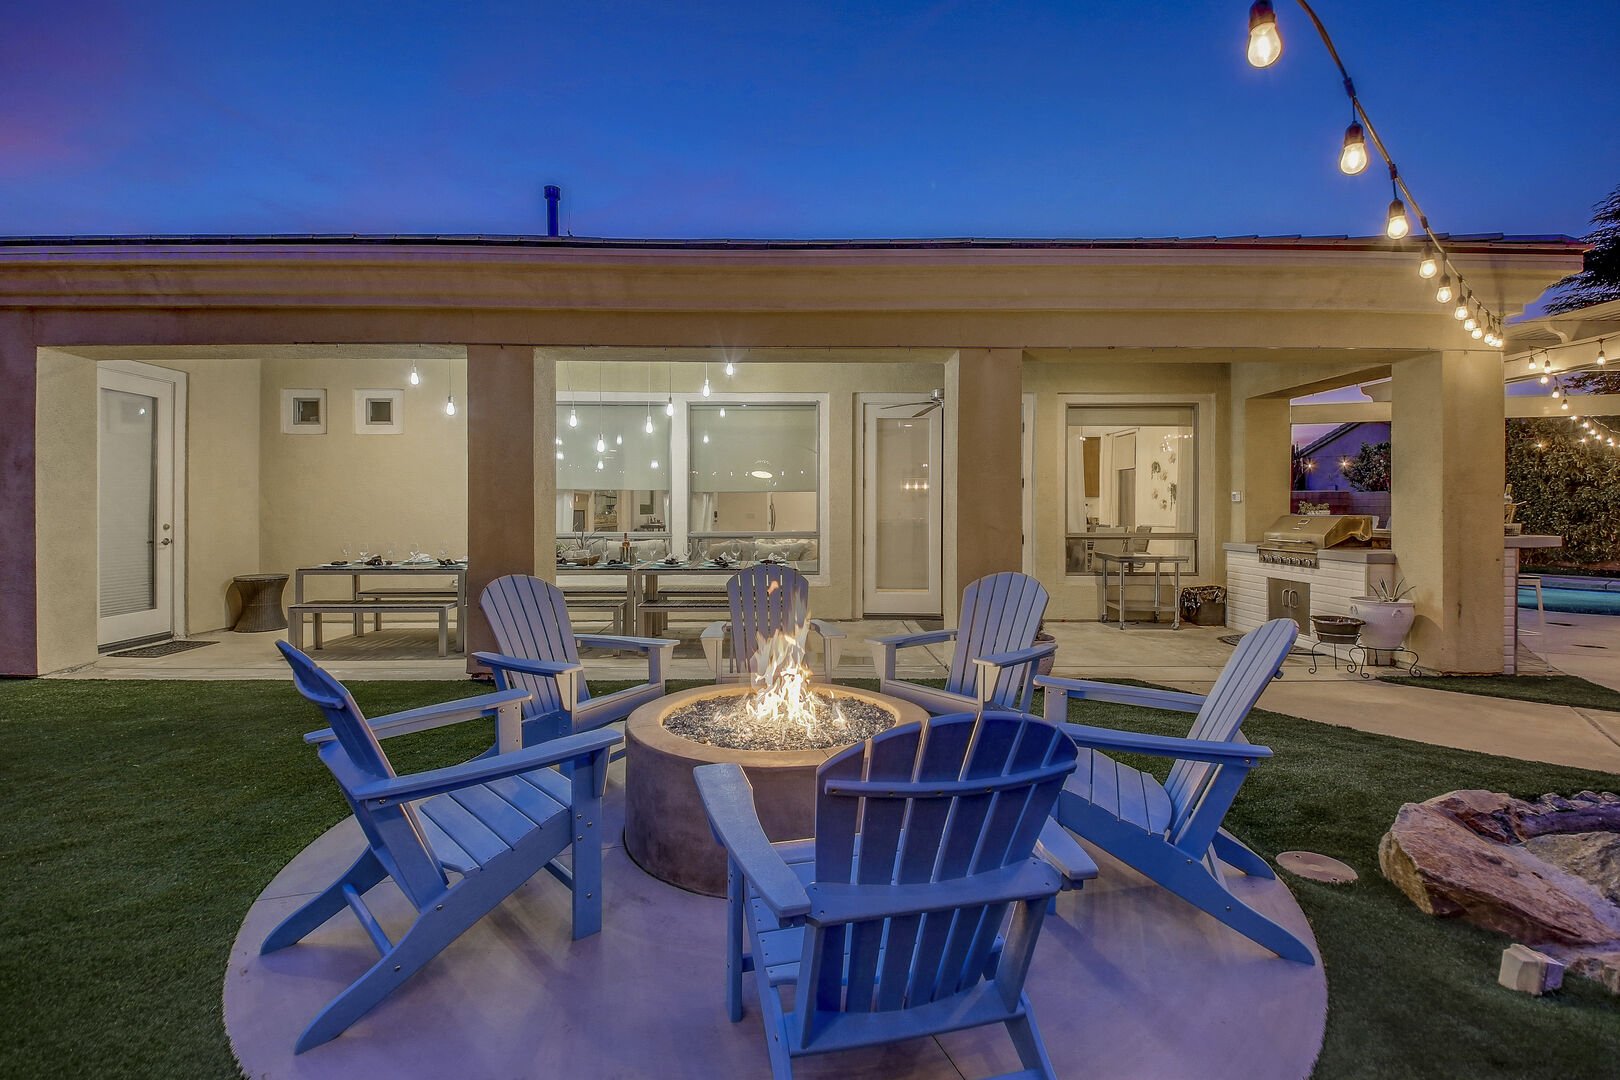 Enjoy a glass of wine by the fire pit!